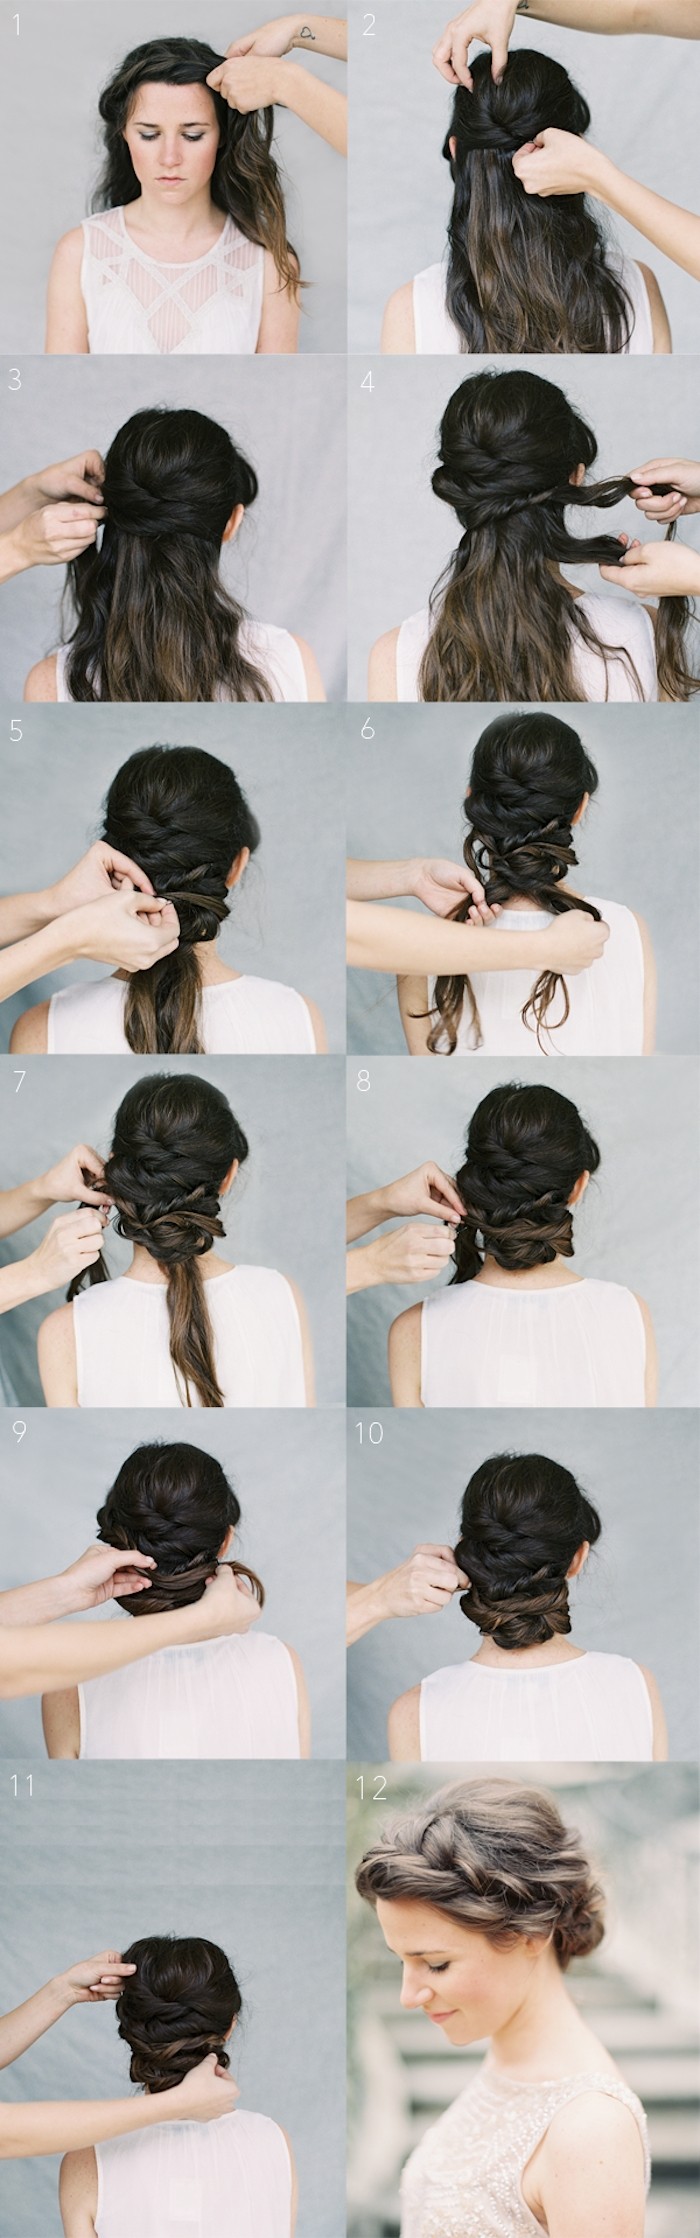 Stunning Braided Updo for Wedding Hairstyles